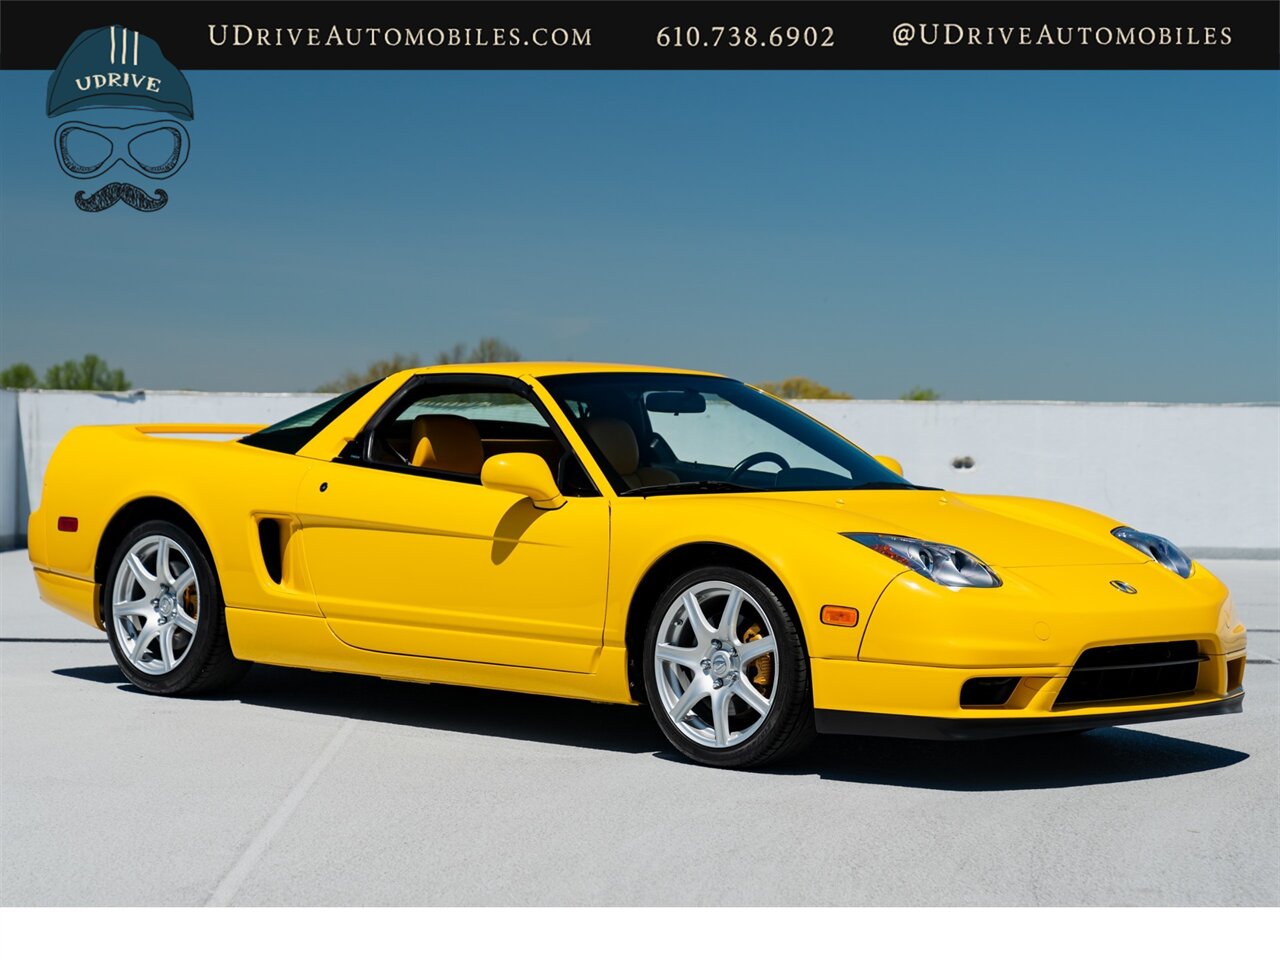 2003 Acura NSX NSX-T  Spa Yellow over Yellow Lthr 1 of 13 Produced - Photo 15 - West Chester, PA 19382